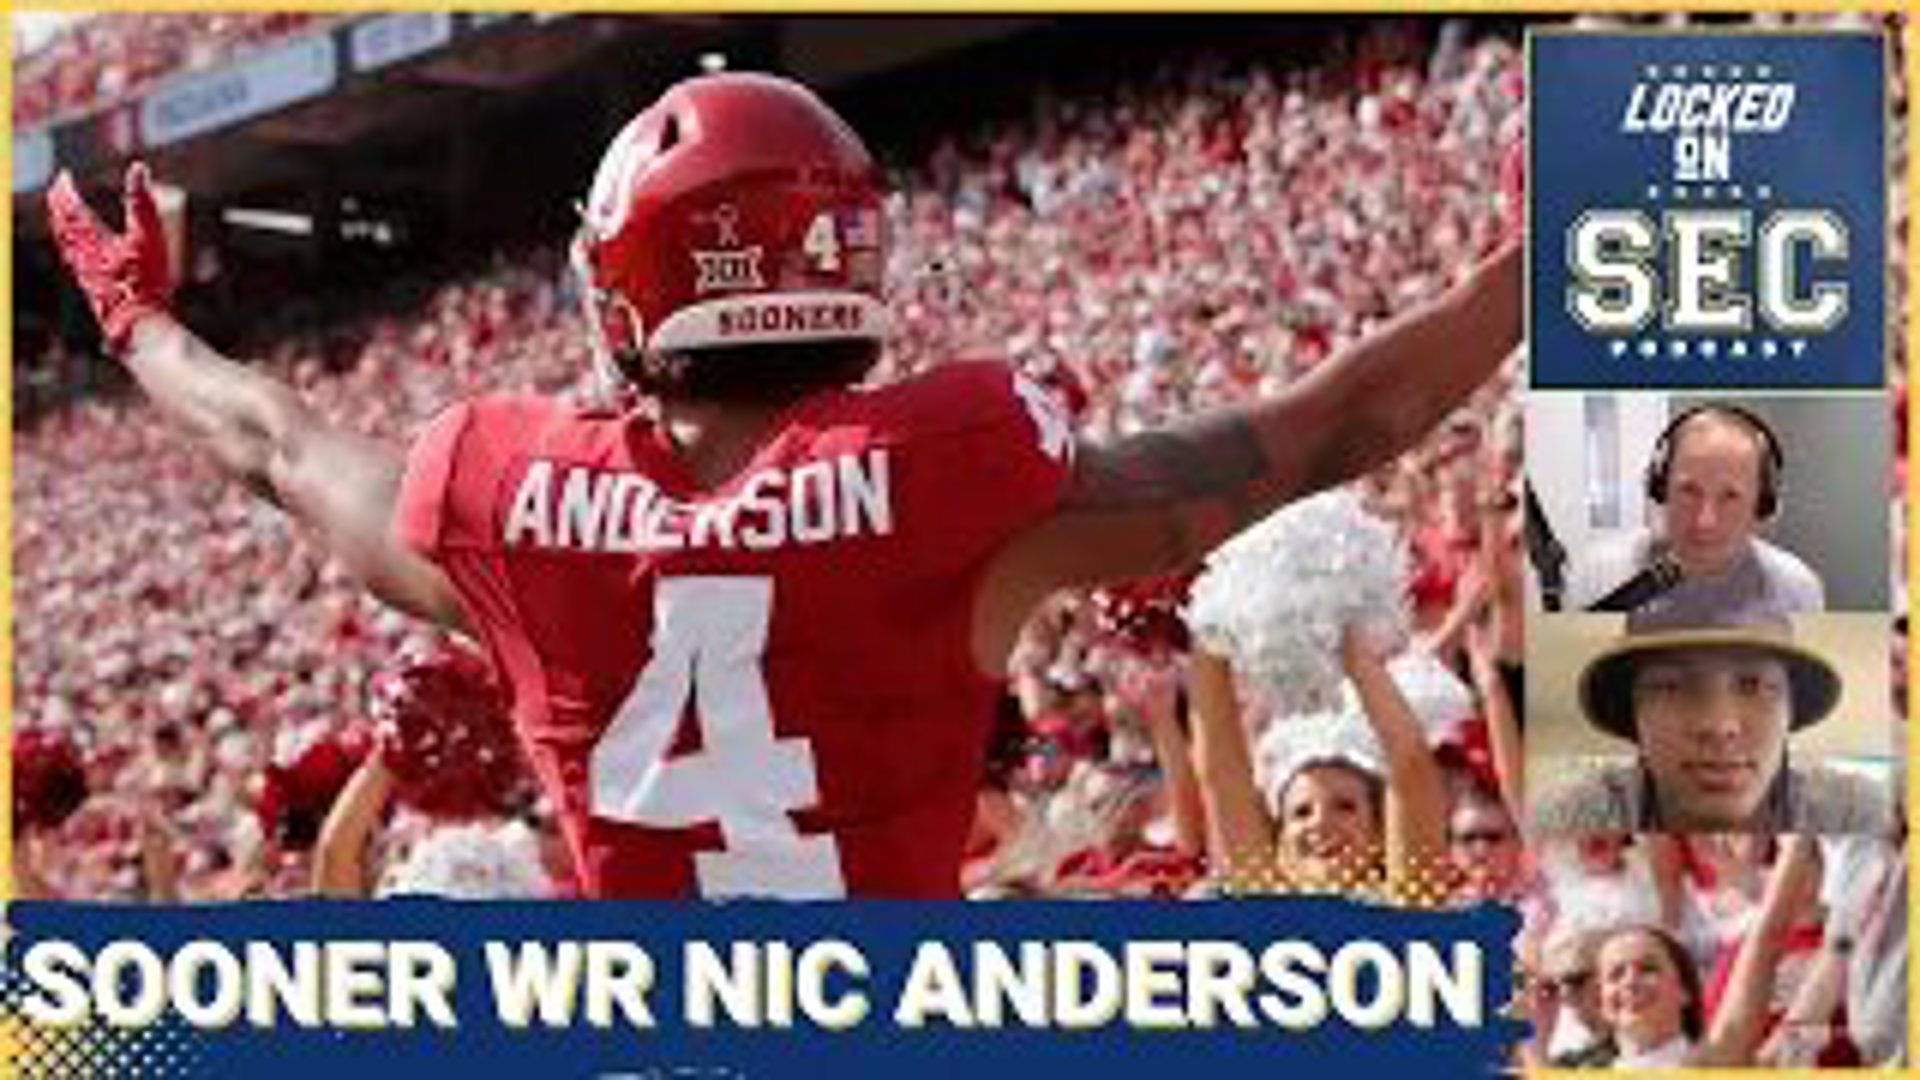 On today's show, we catch up with Oklahoma Sooners WR Nic Anderson who is coming off of a breakout redshirt freshman season where he recorded 798 receiving yards.